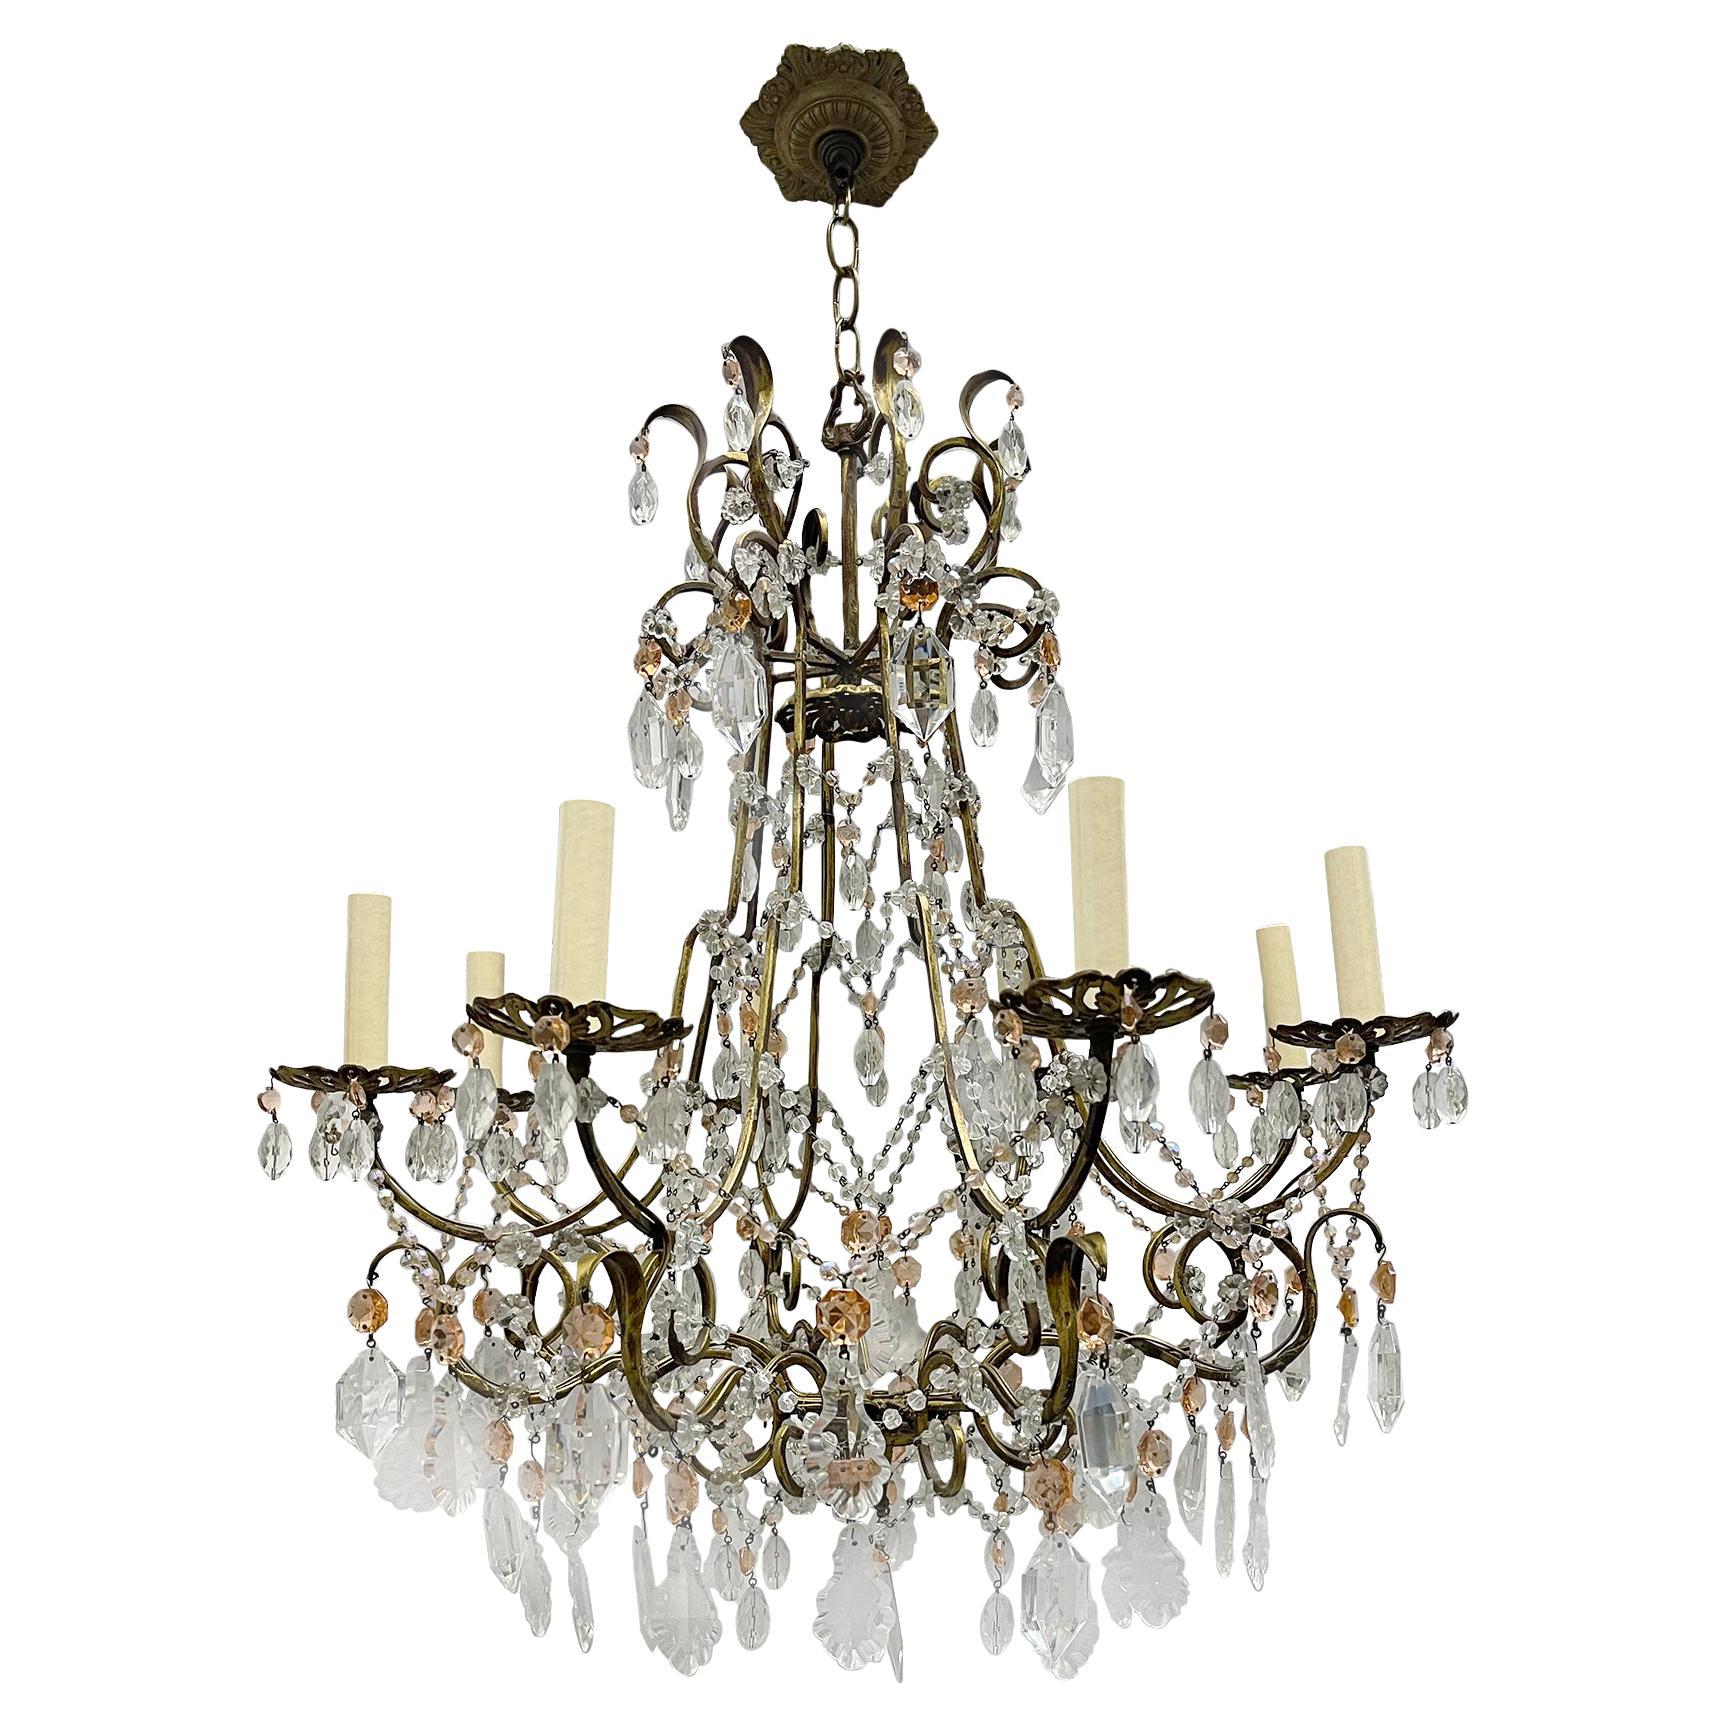 French Gilt Chandelier with Crystals